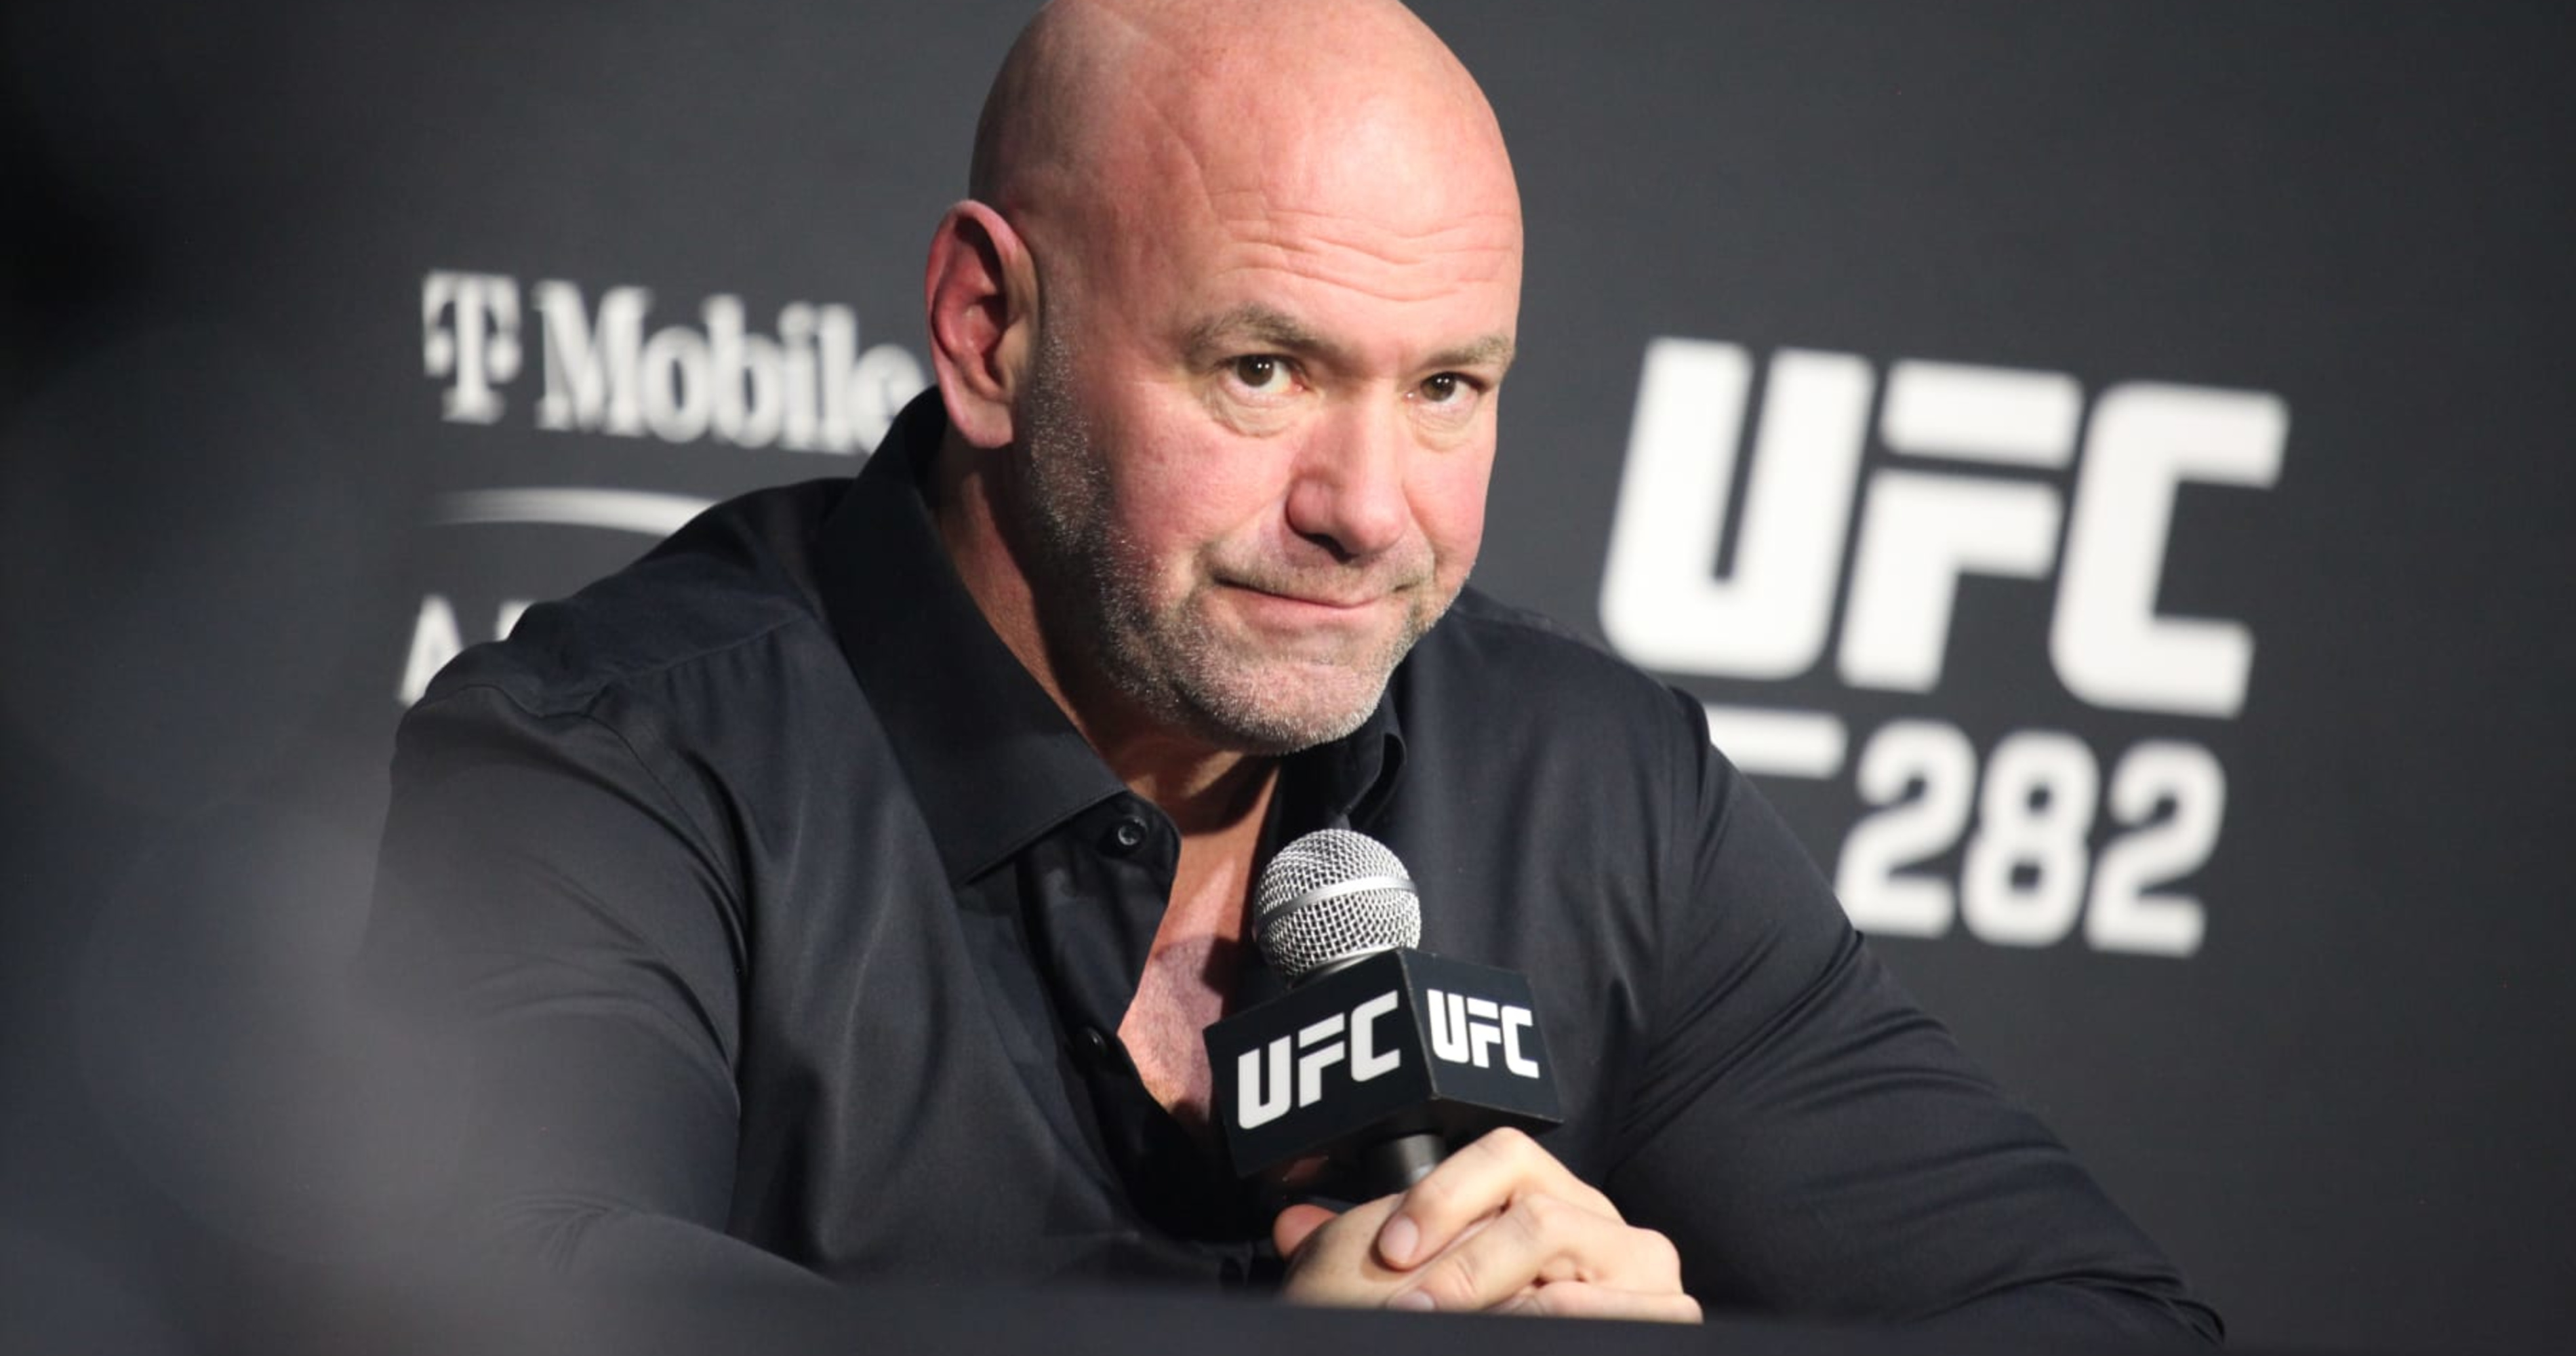 UFC's Dana White Says He Won't Face Discipline After Physical